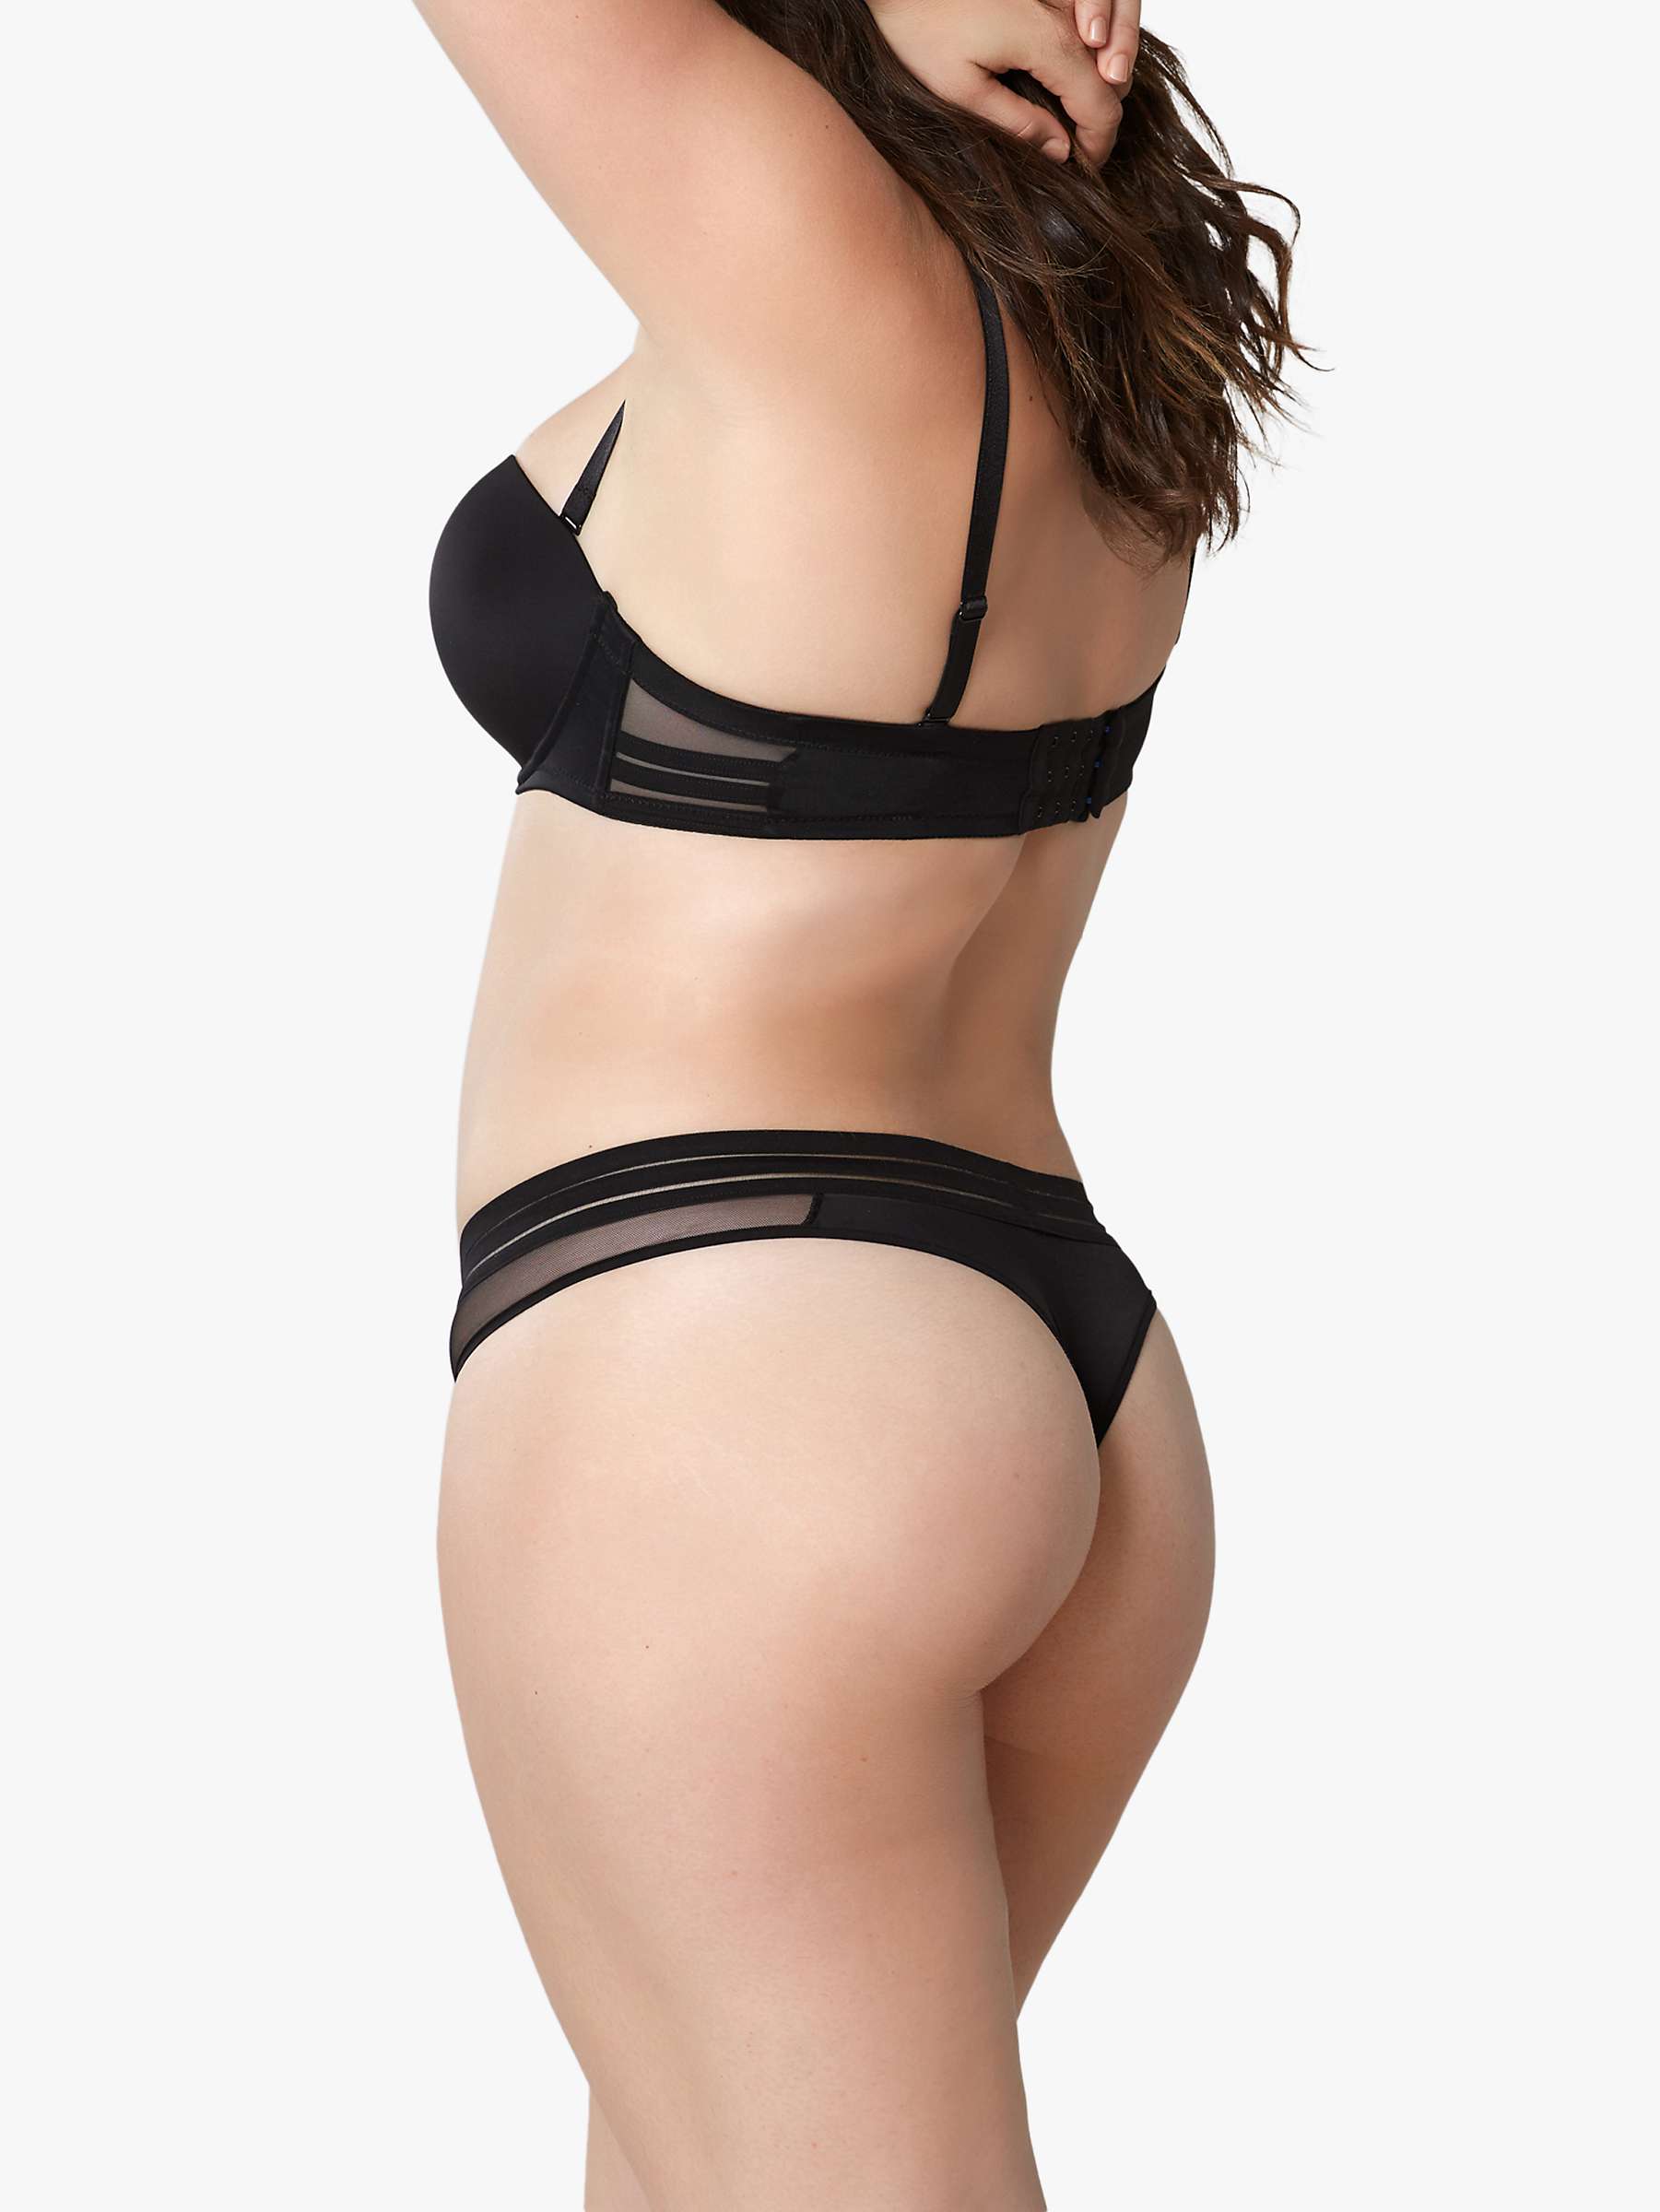 Buy Maison Lejaby Nufit Tanga Knickers Online at johnlewis.com